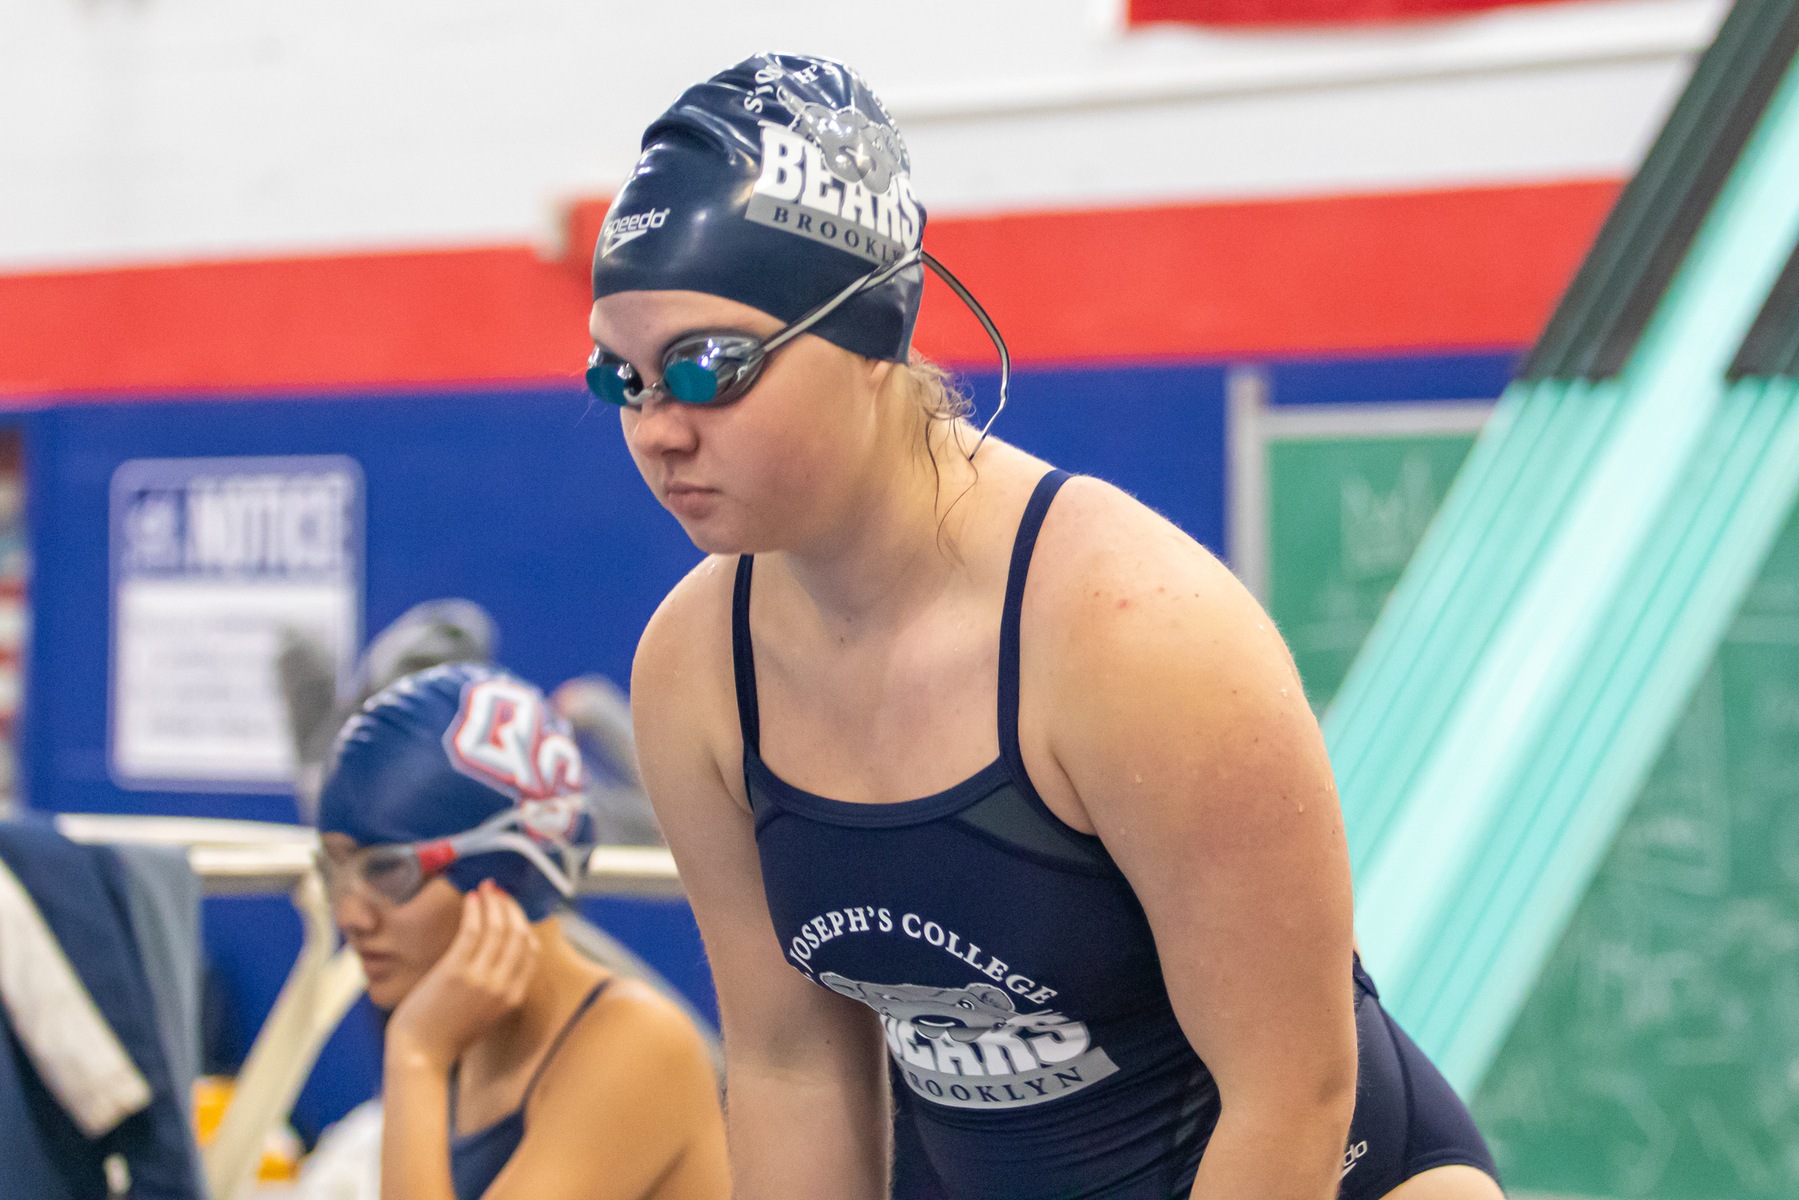 Women's Swimming Opens New Year at Sibling Rivals SJC Long Island